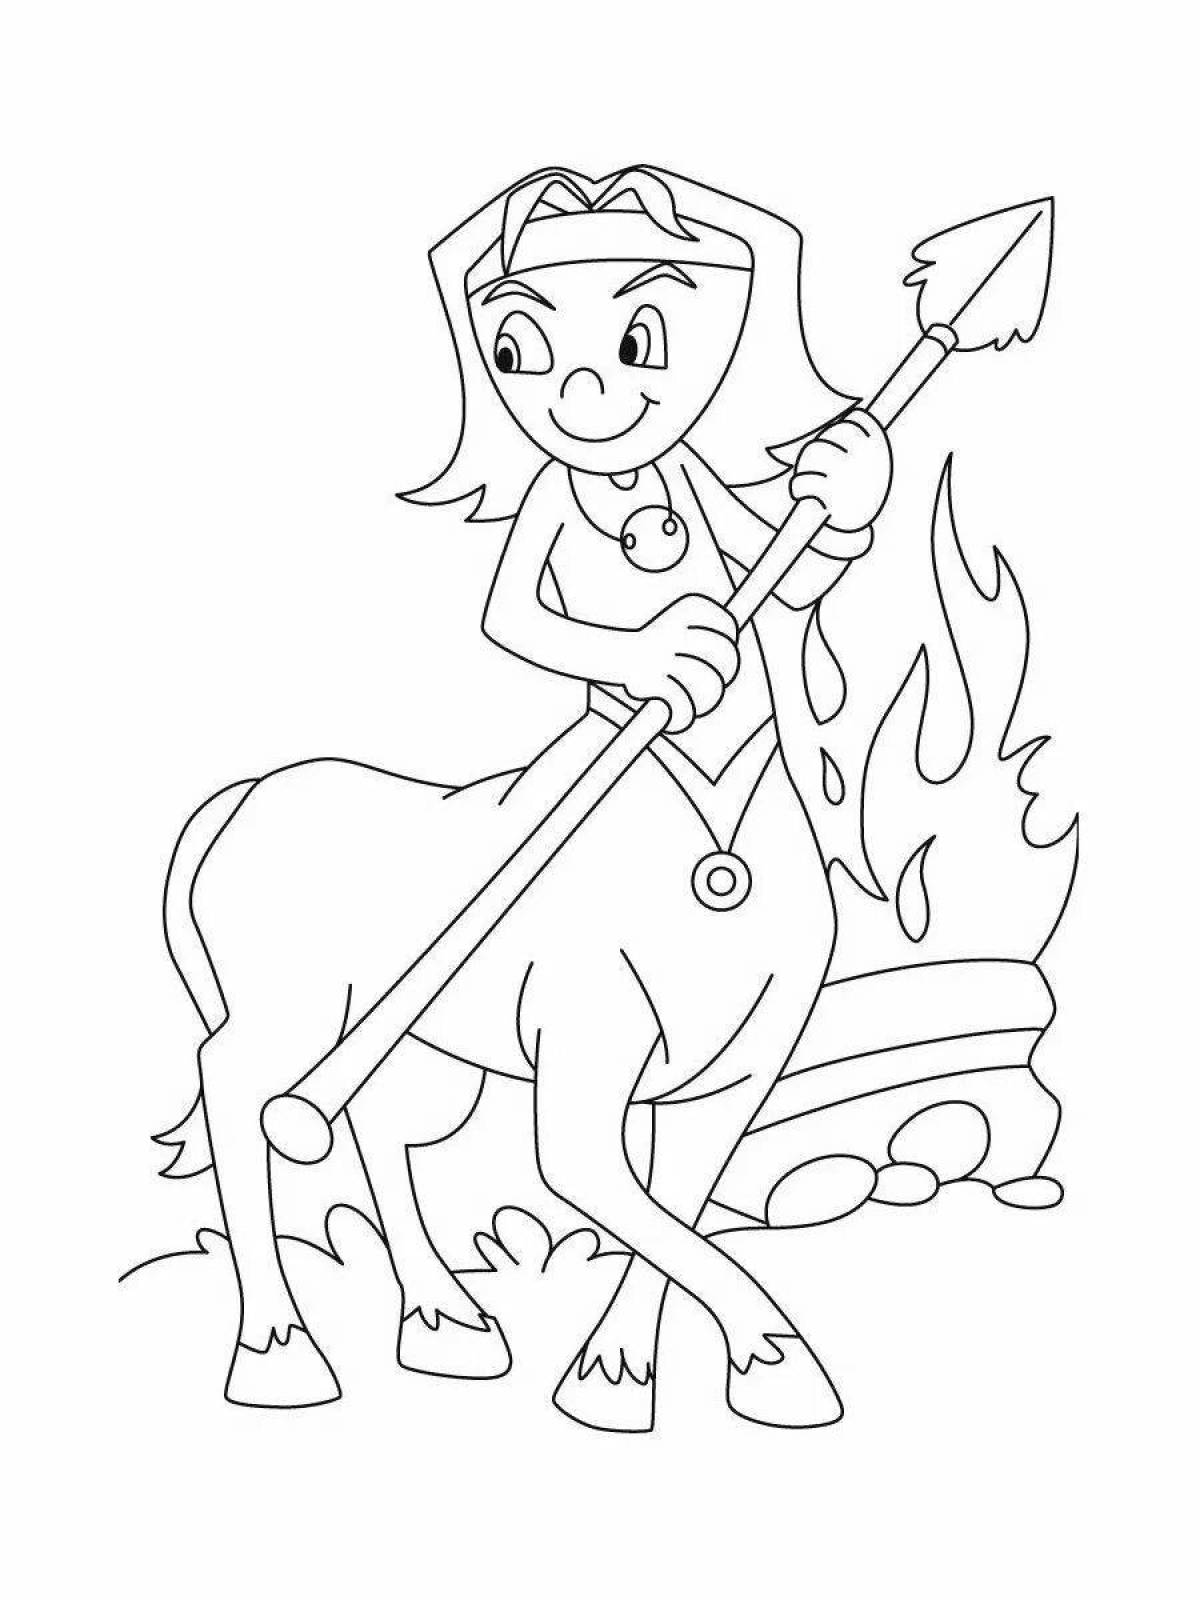 Magic centaur coloring pages for kids